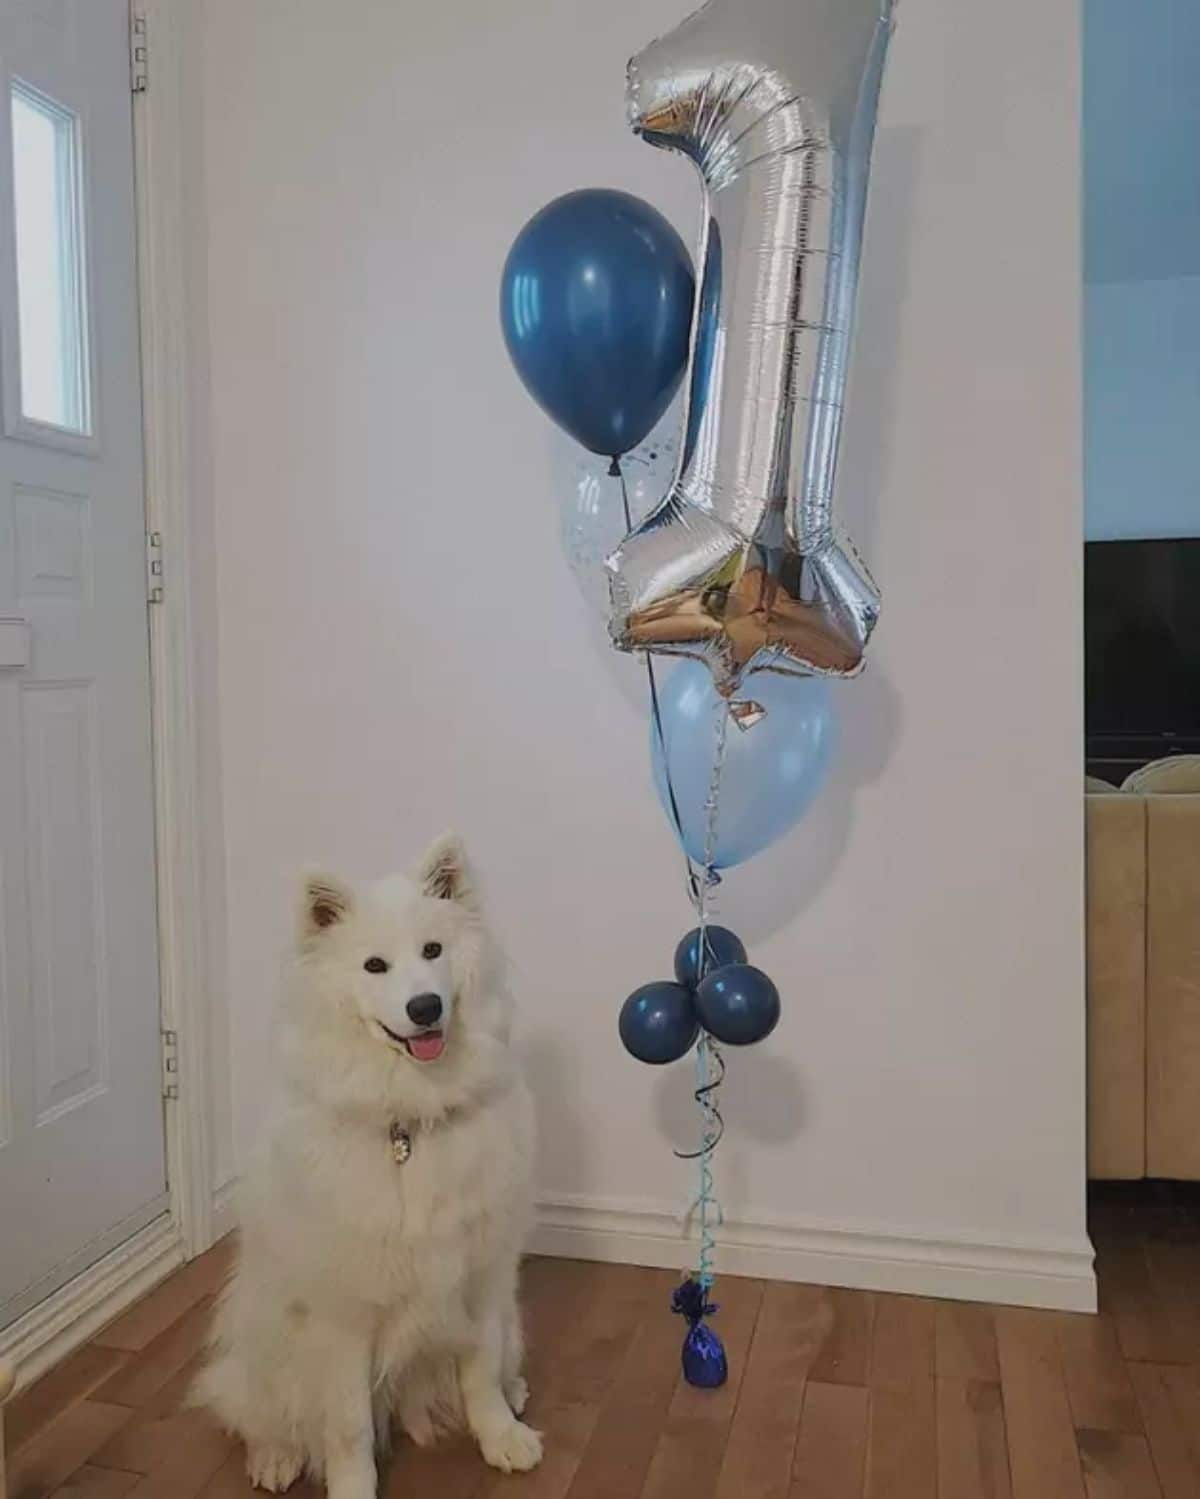 fluffy white samoyed sitting next to some blue balloons and a large silver 1 balloon